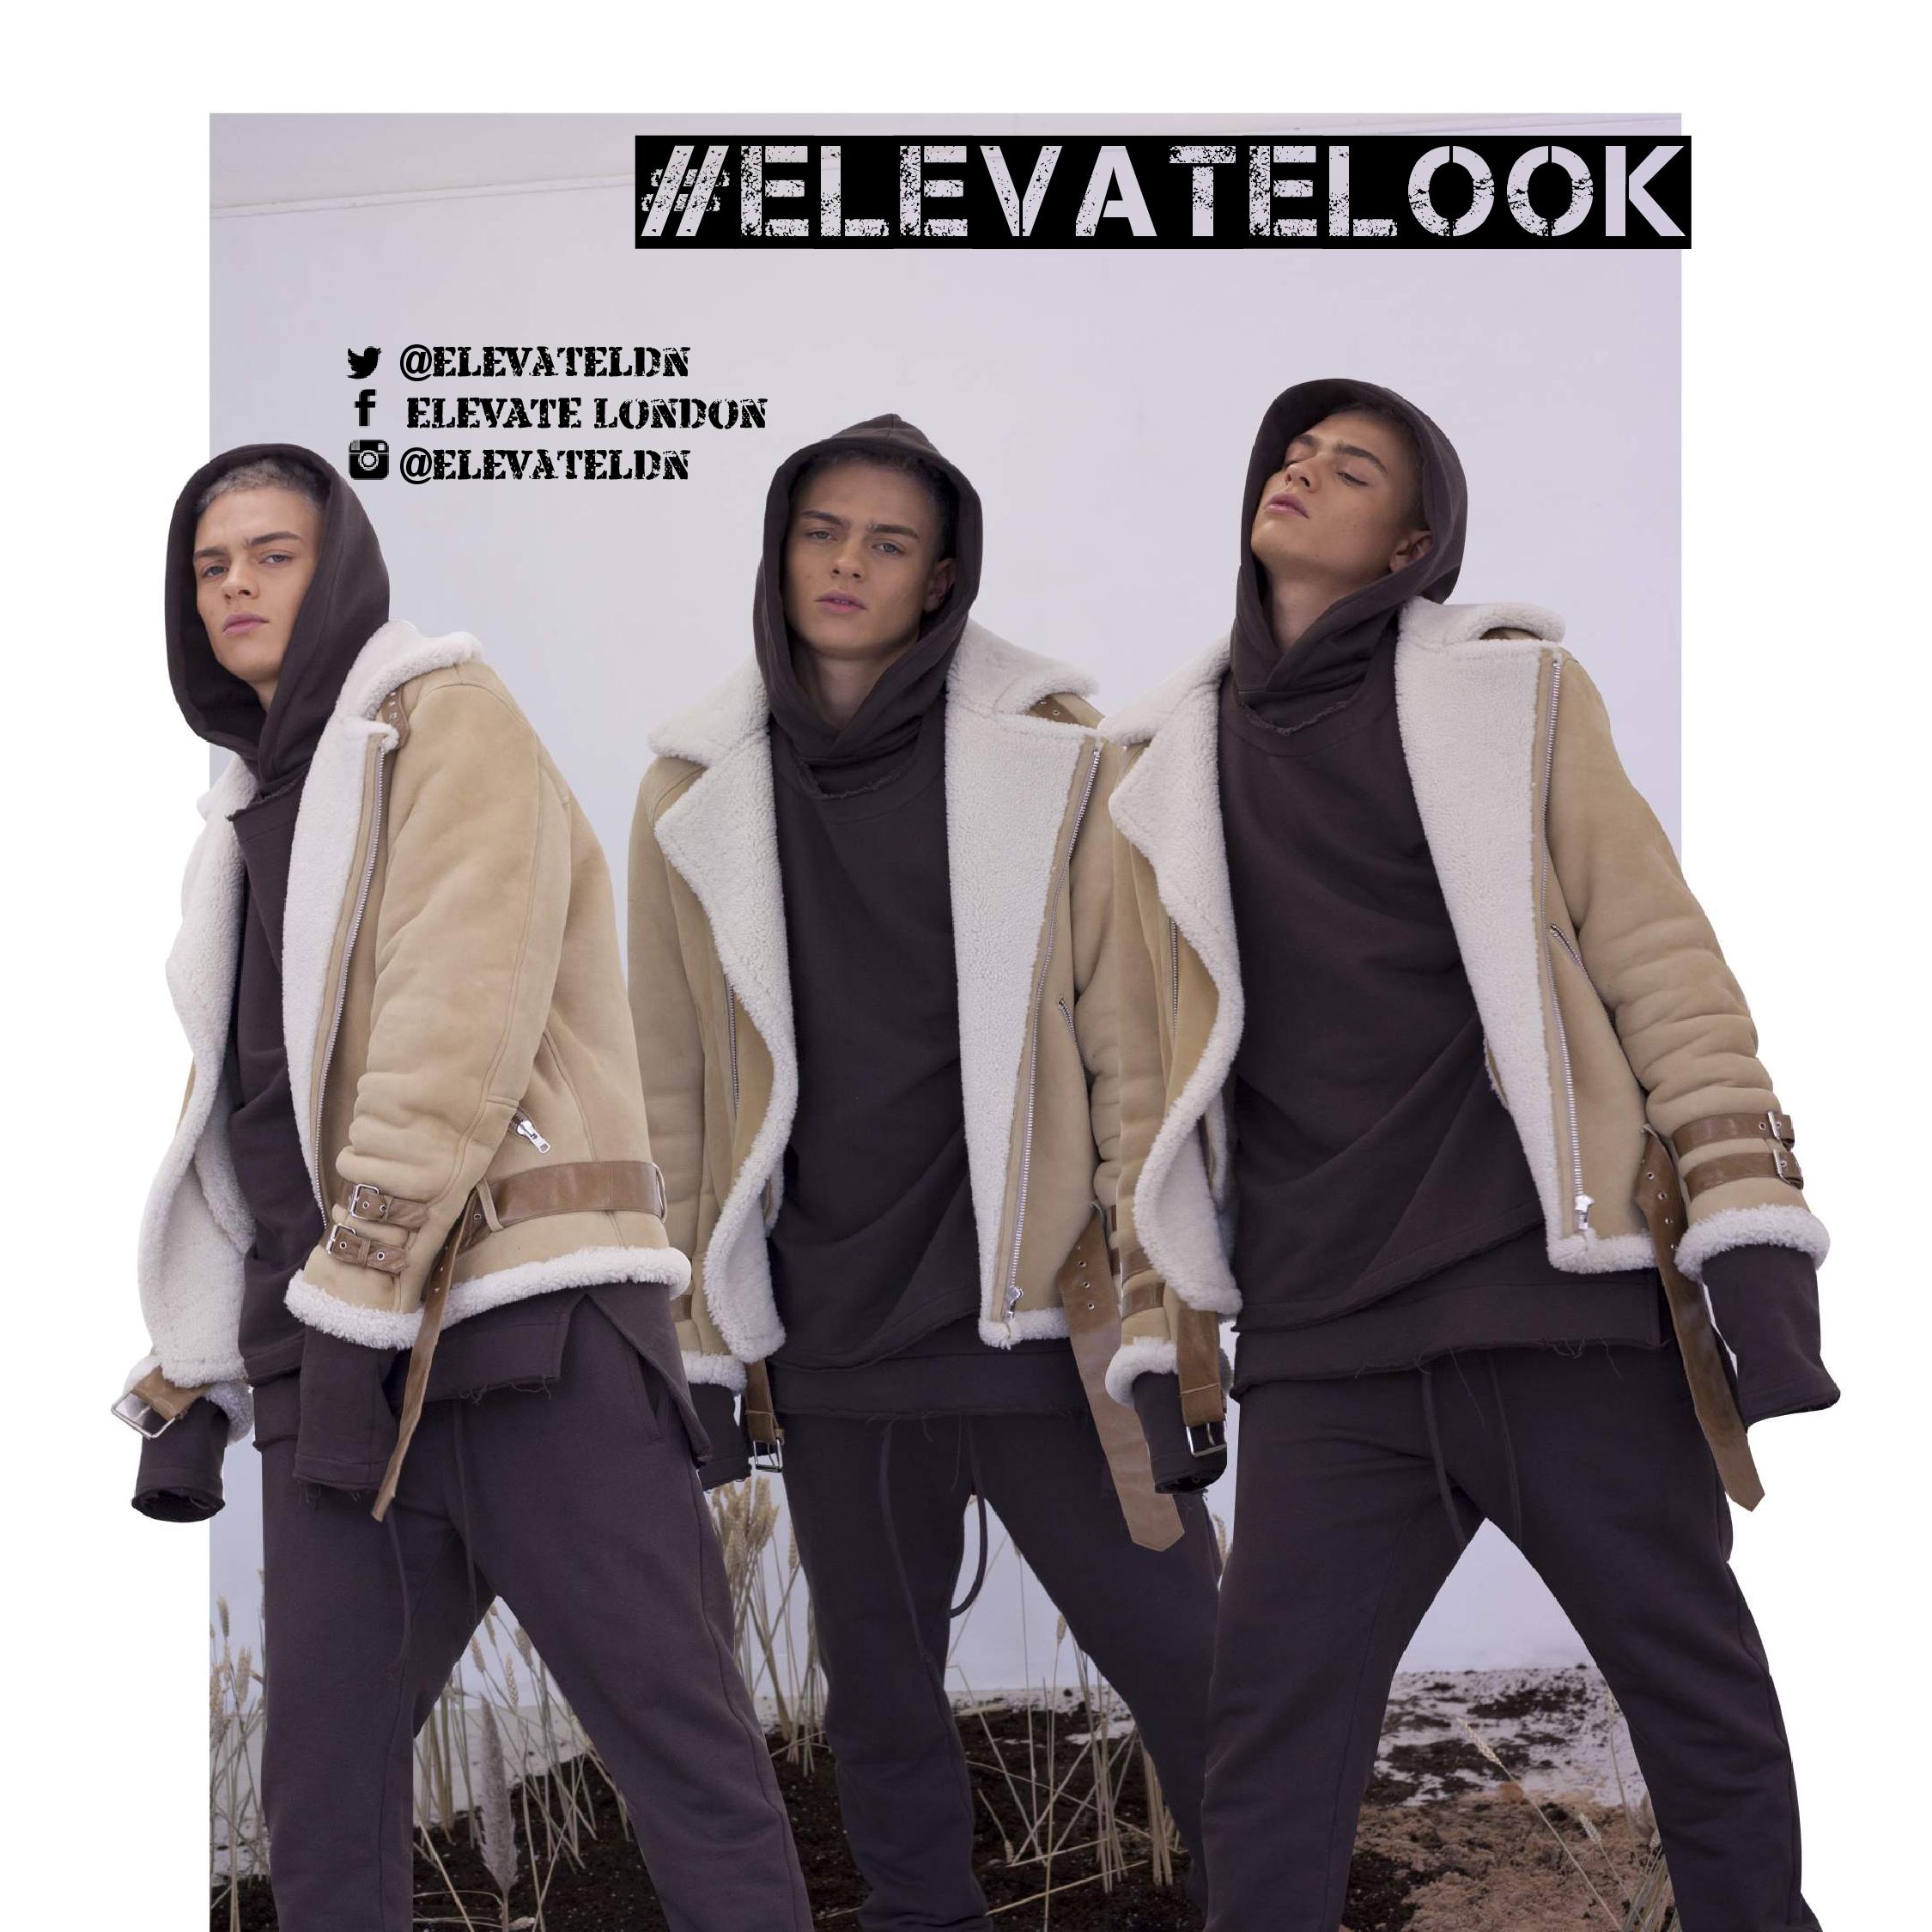 Win The Look: Elevate London Giveaway